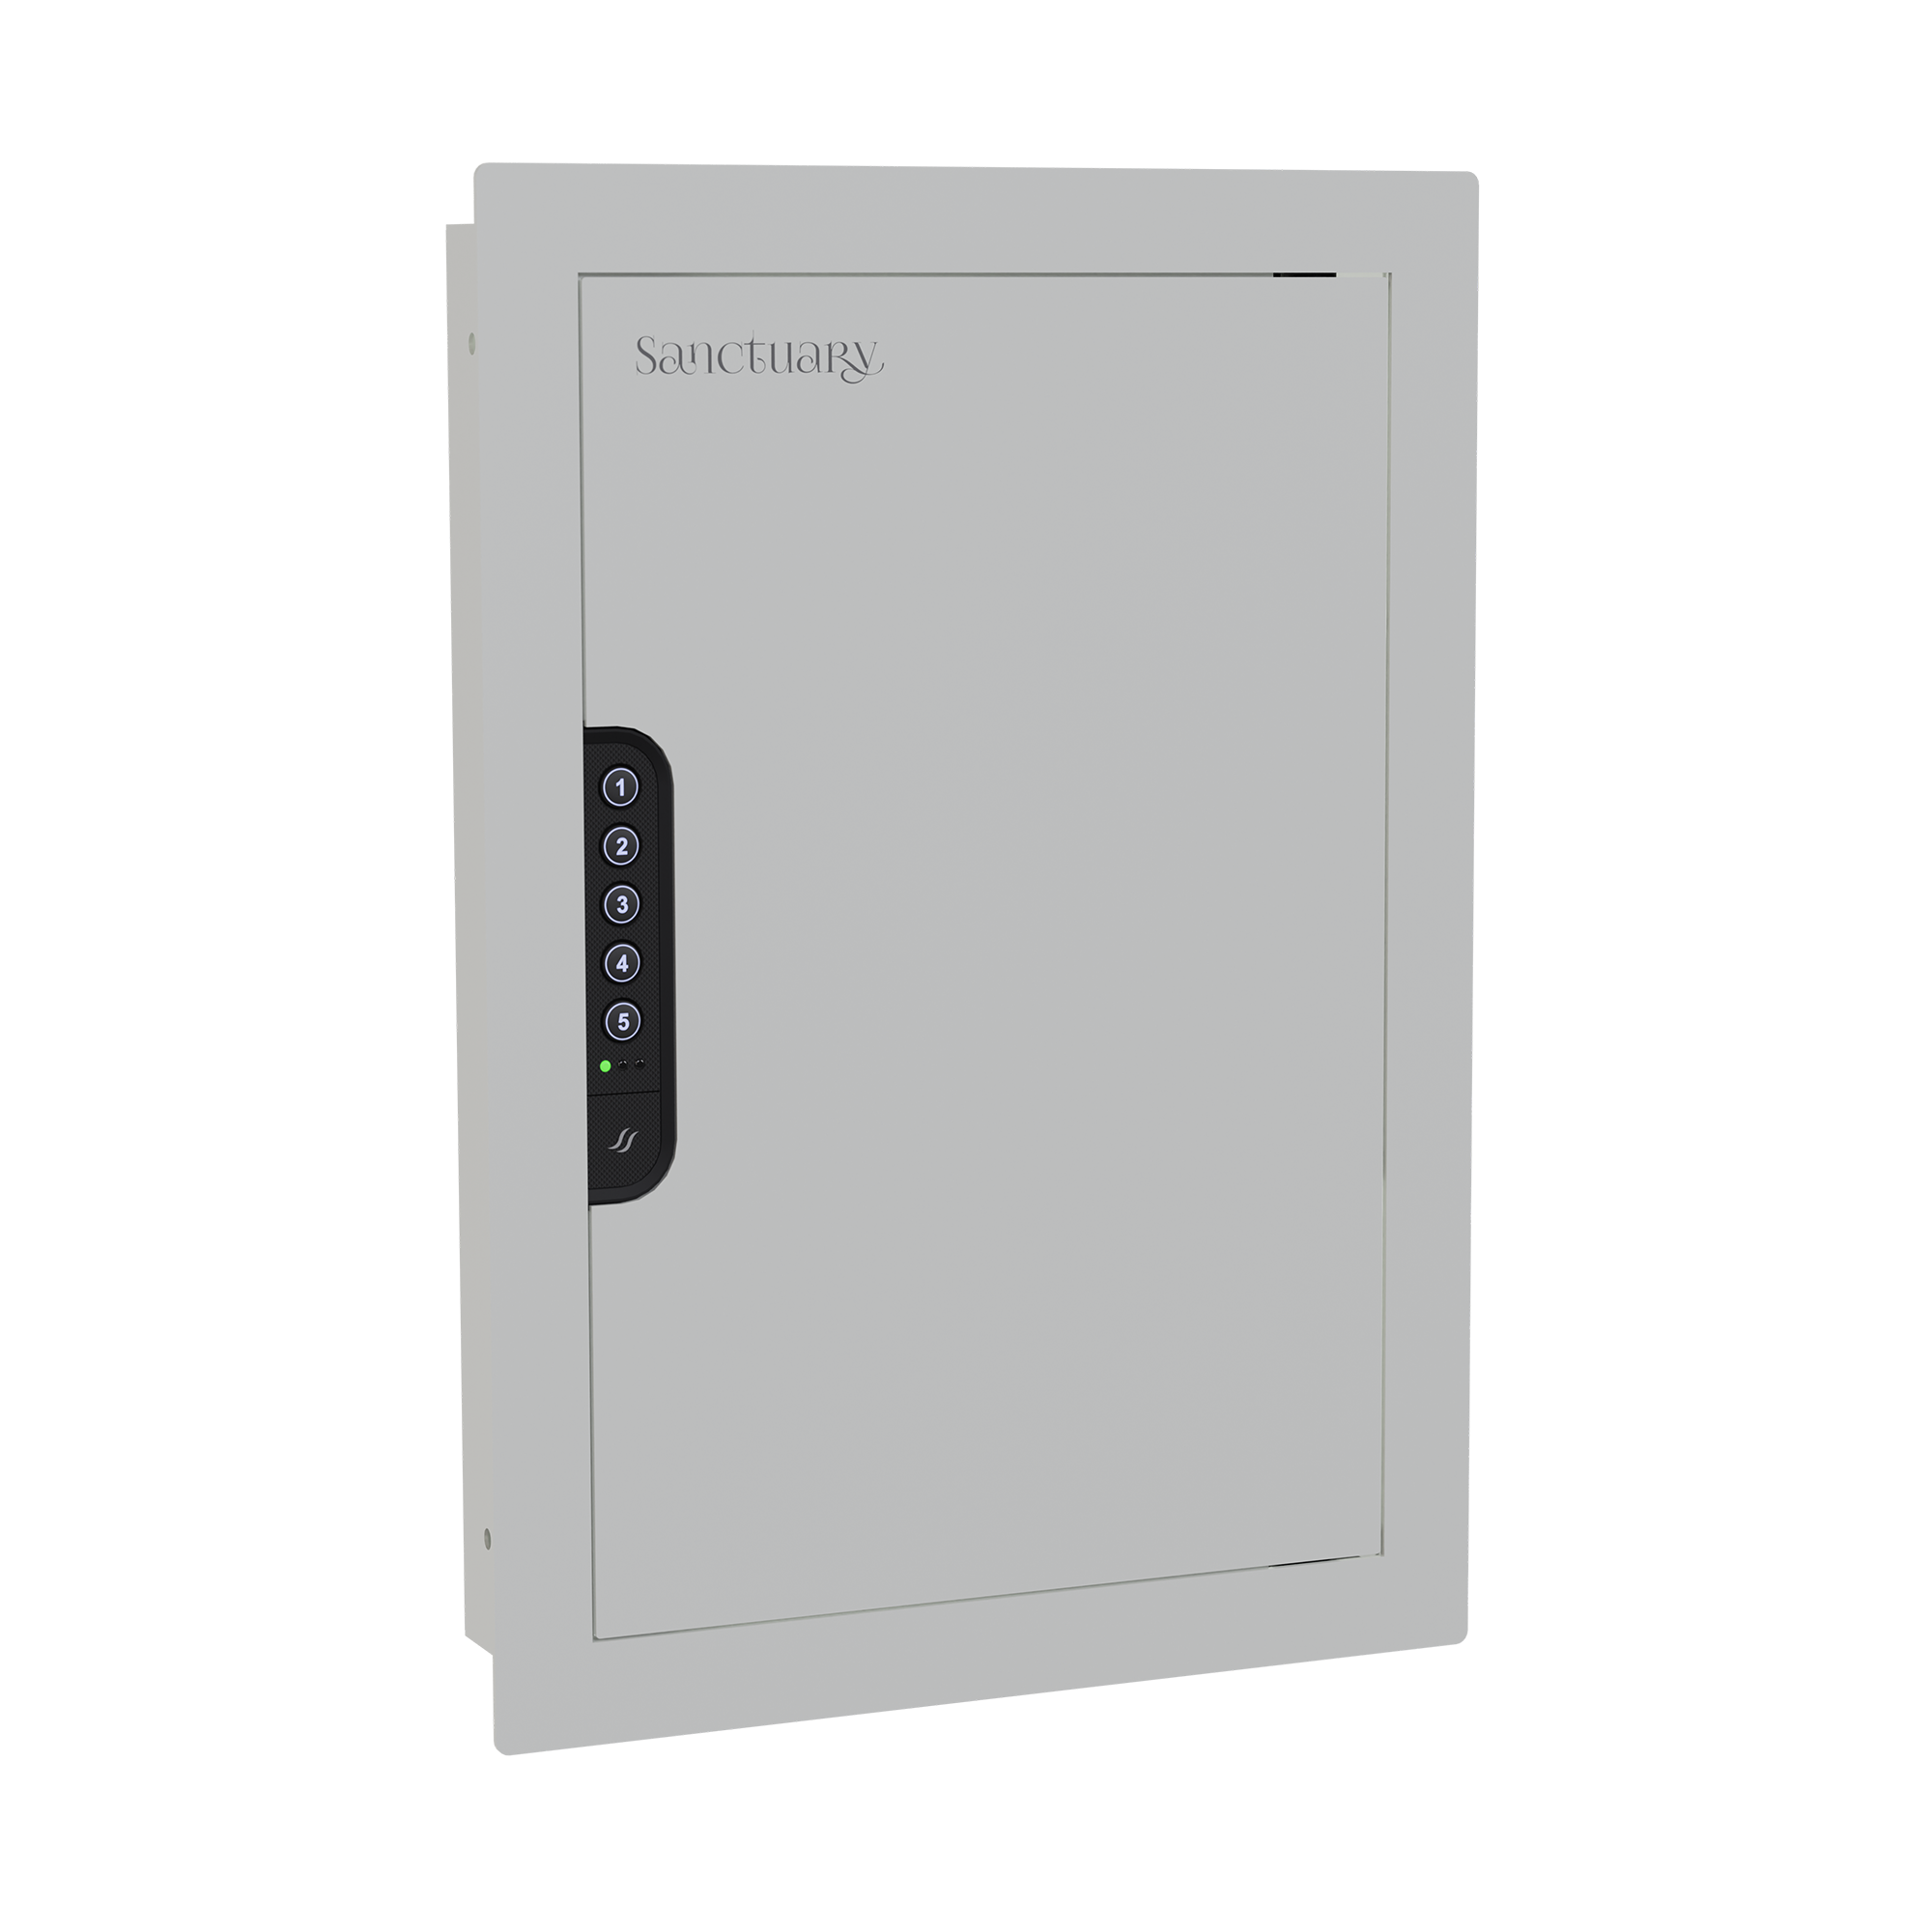 Sports Afield SA-IWV-W Sanctuary In-Wall Safe White